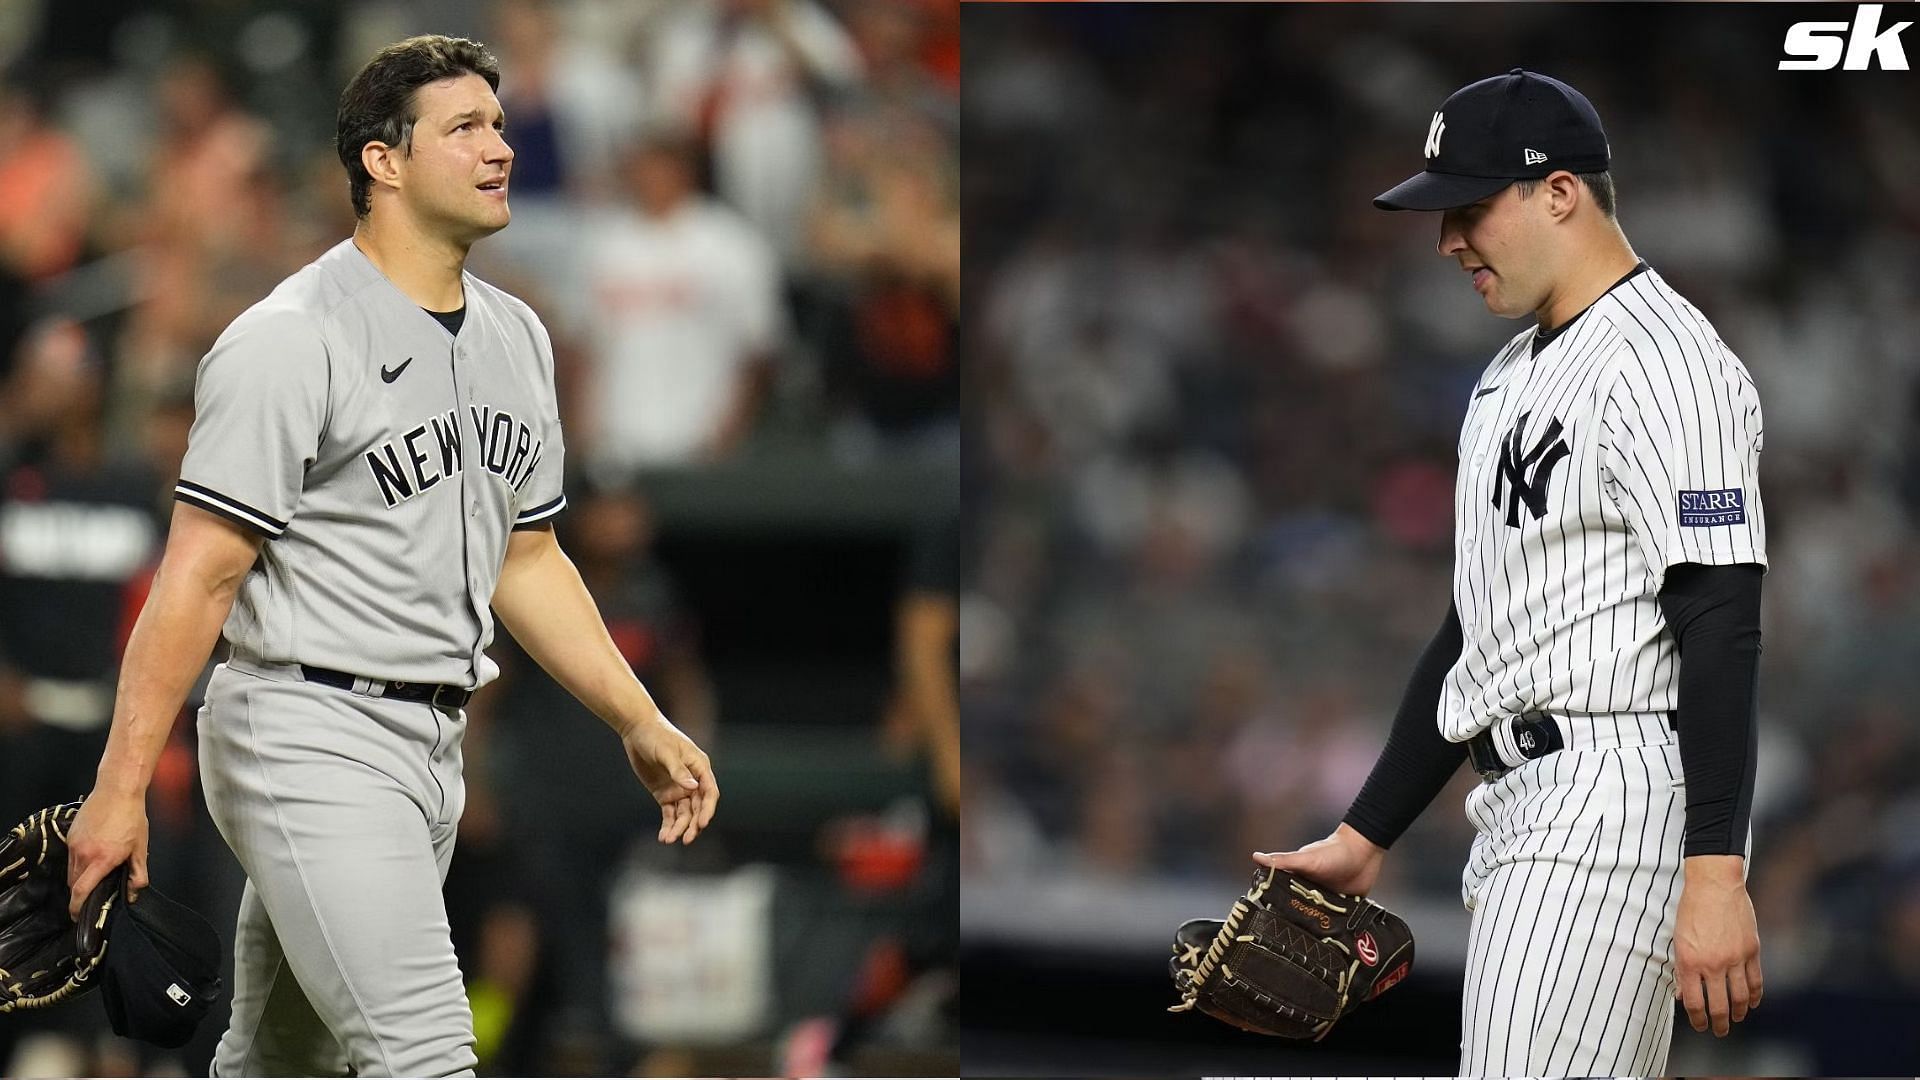 Yankees' Tommy Kahnle shares insights on bouncing back after rough outing